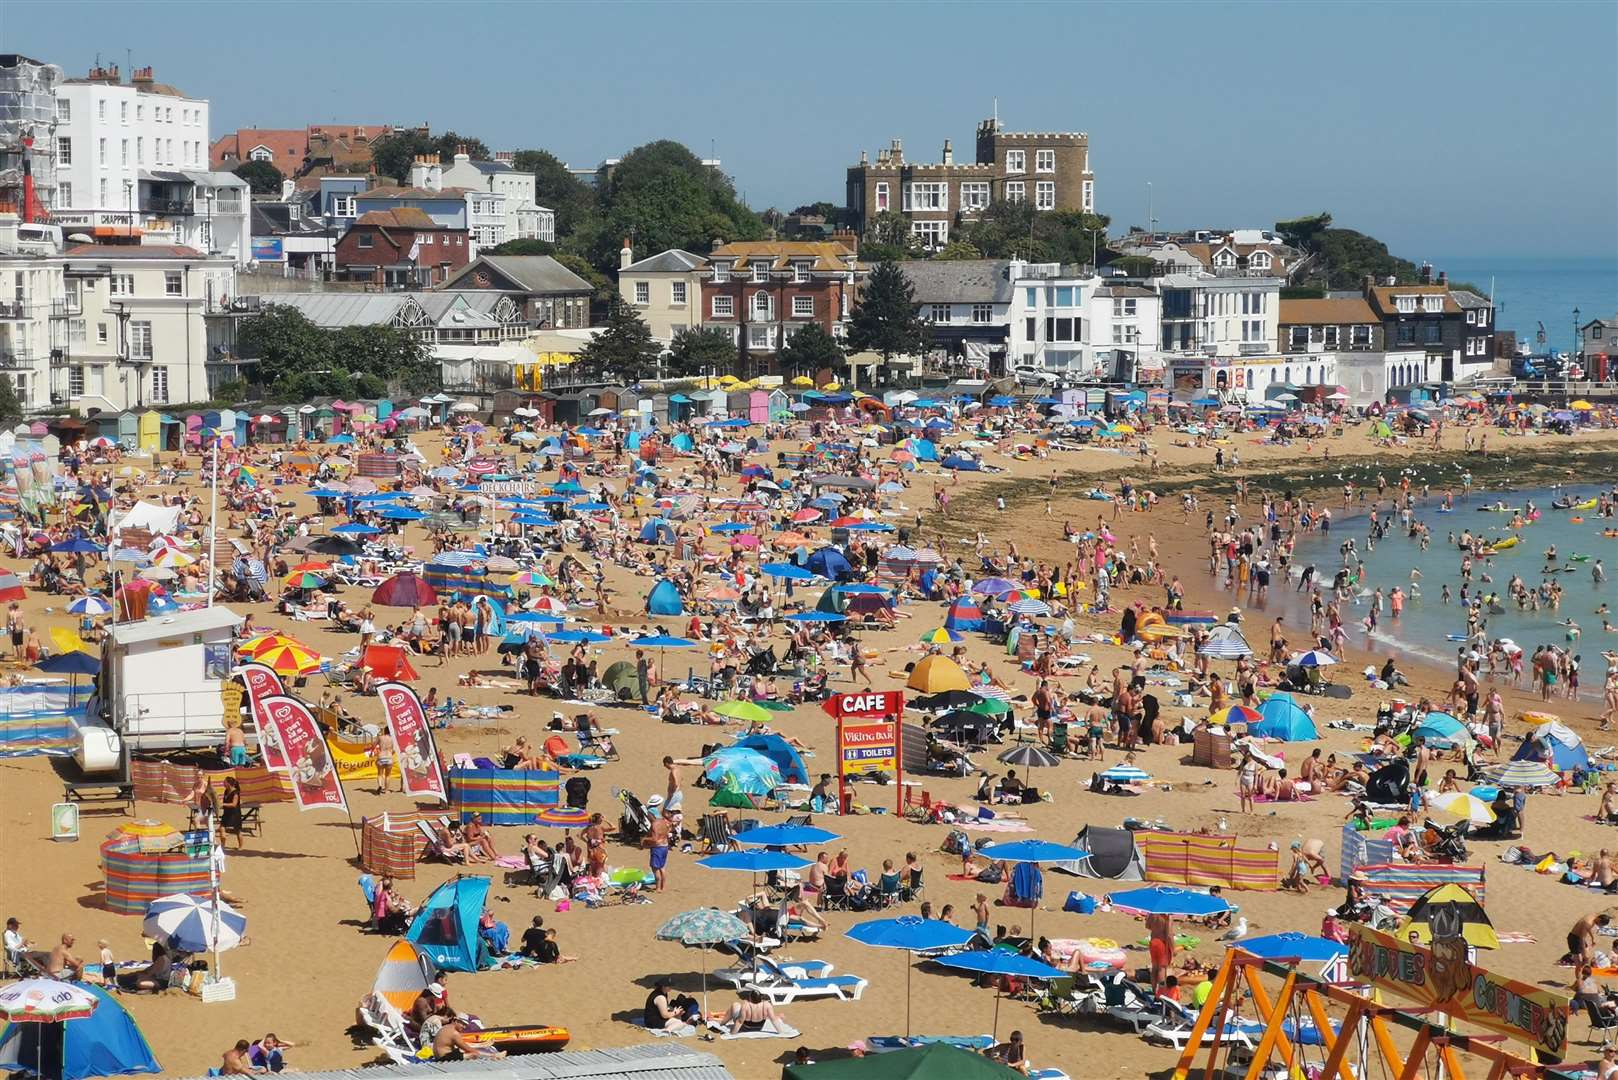 Crowds have flocked to beaches as the weather has been unseasonably hot this month